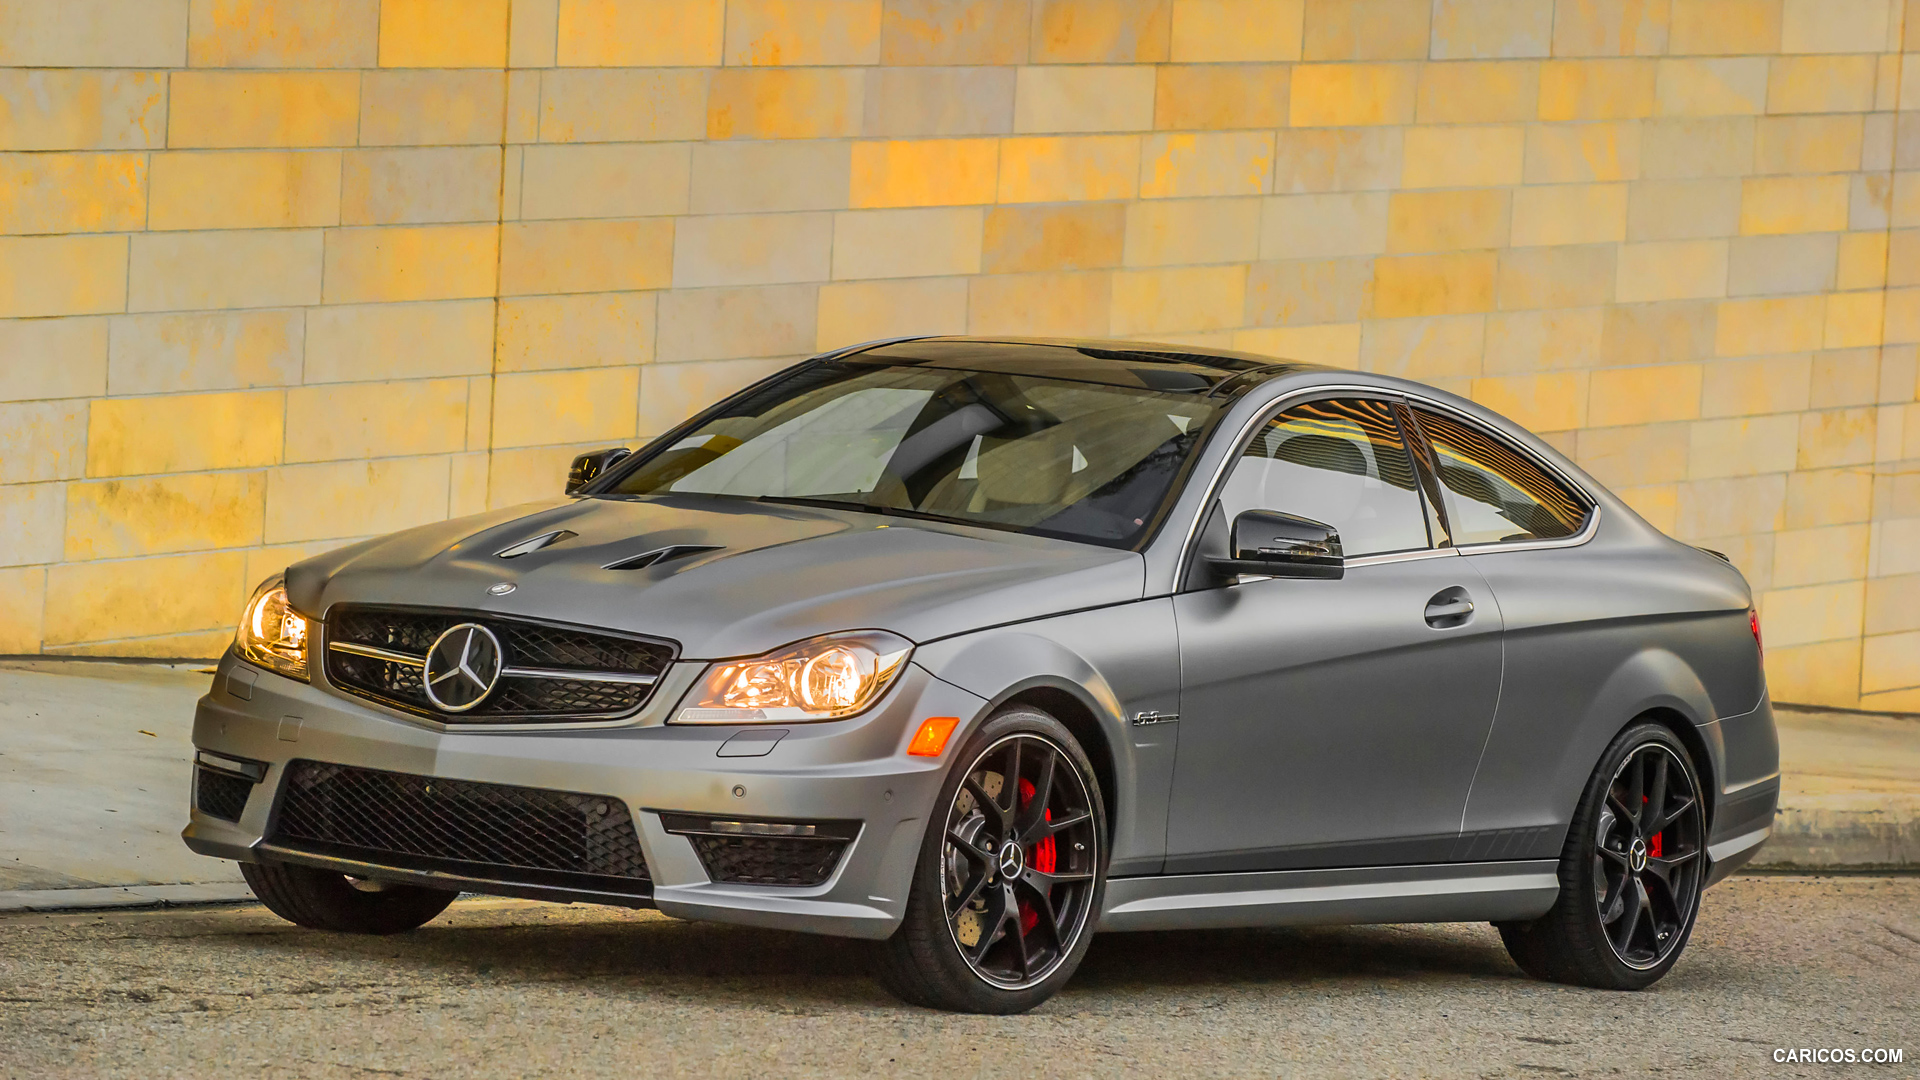 2014 Mercedes-Benz C 63 AMG Edition 507 Coupe (US Version)  - Front, #4 of 14